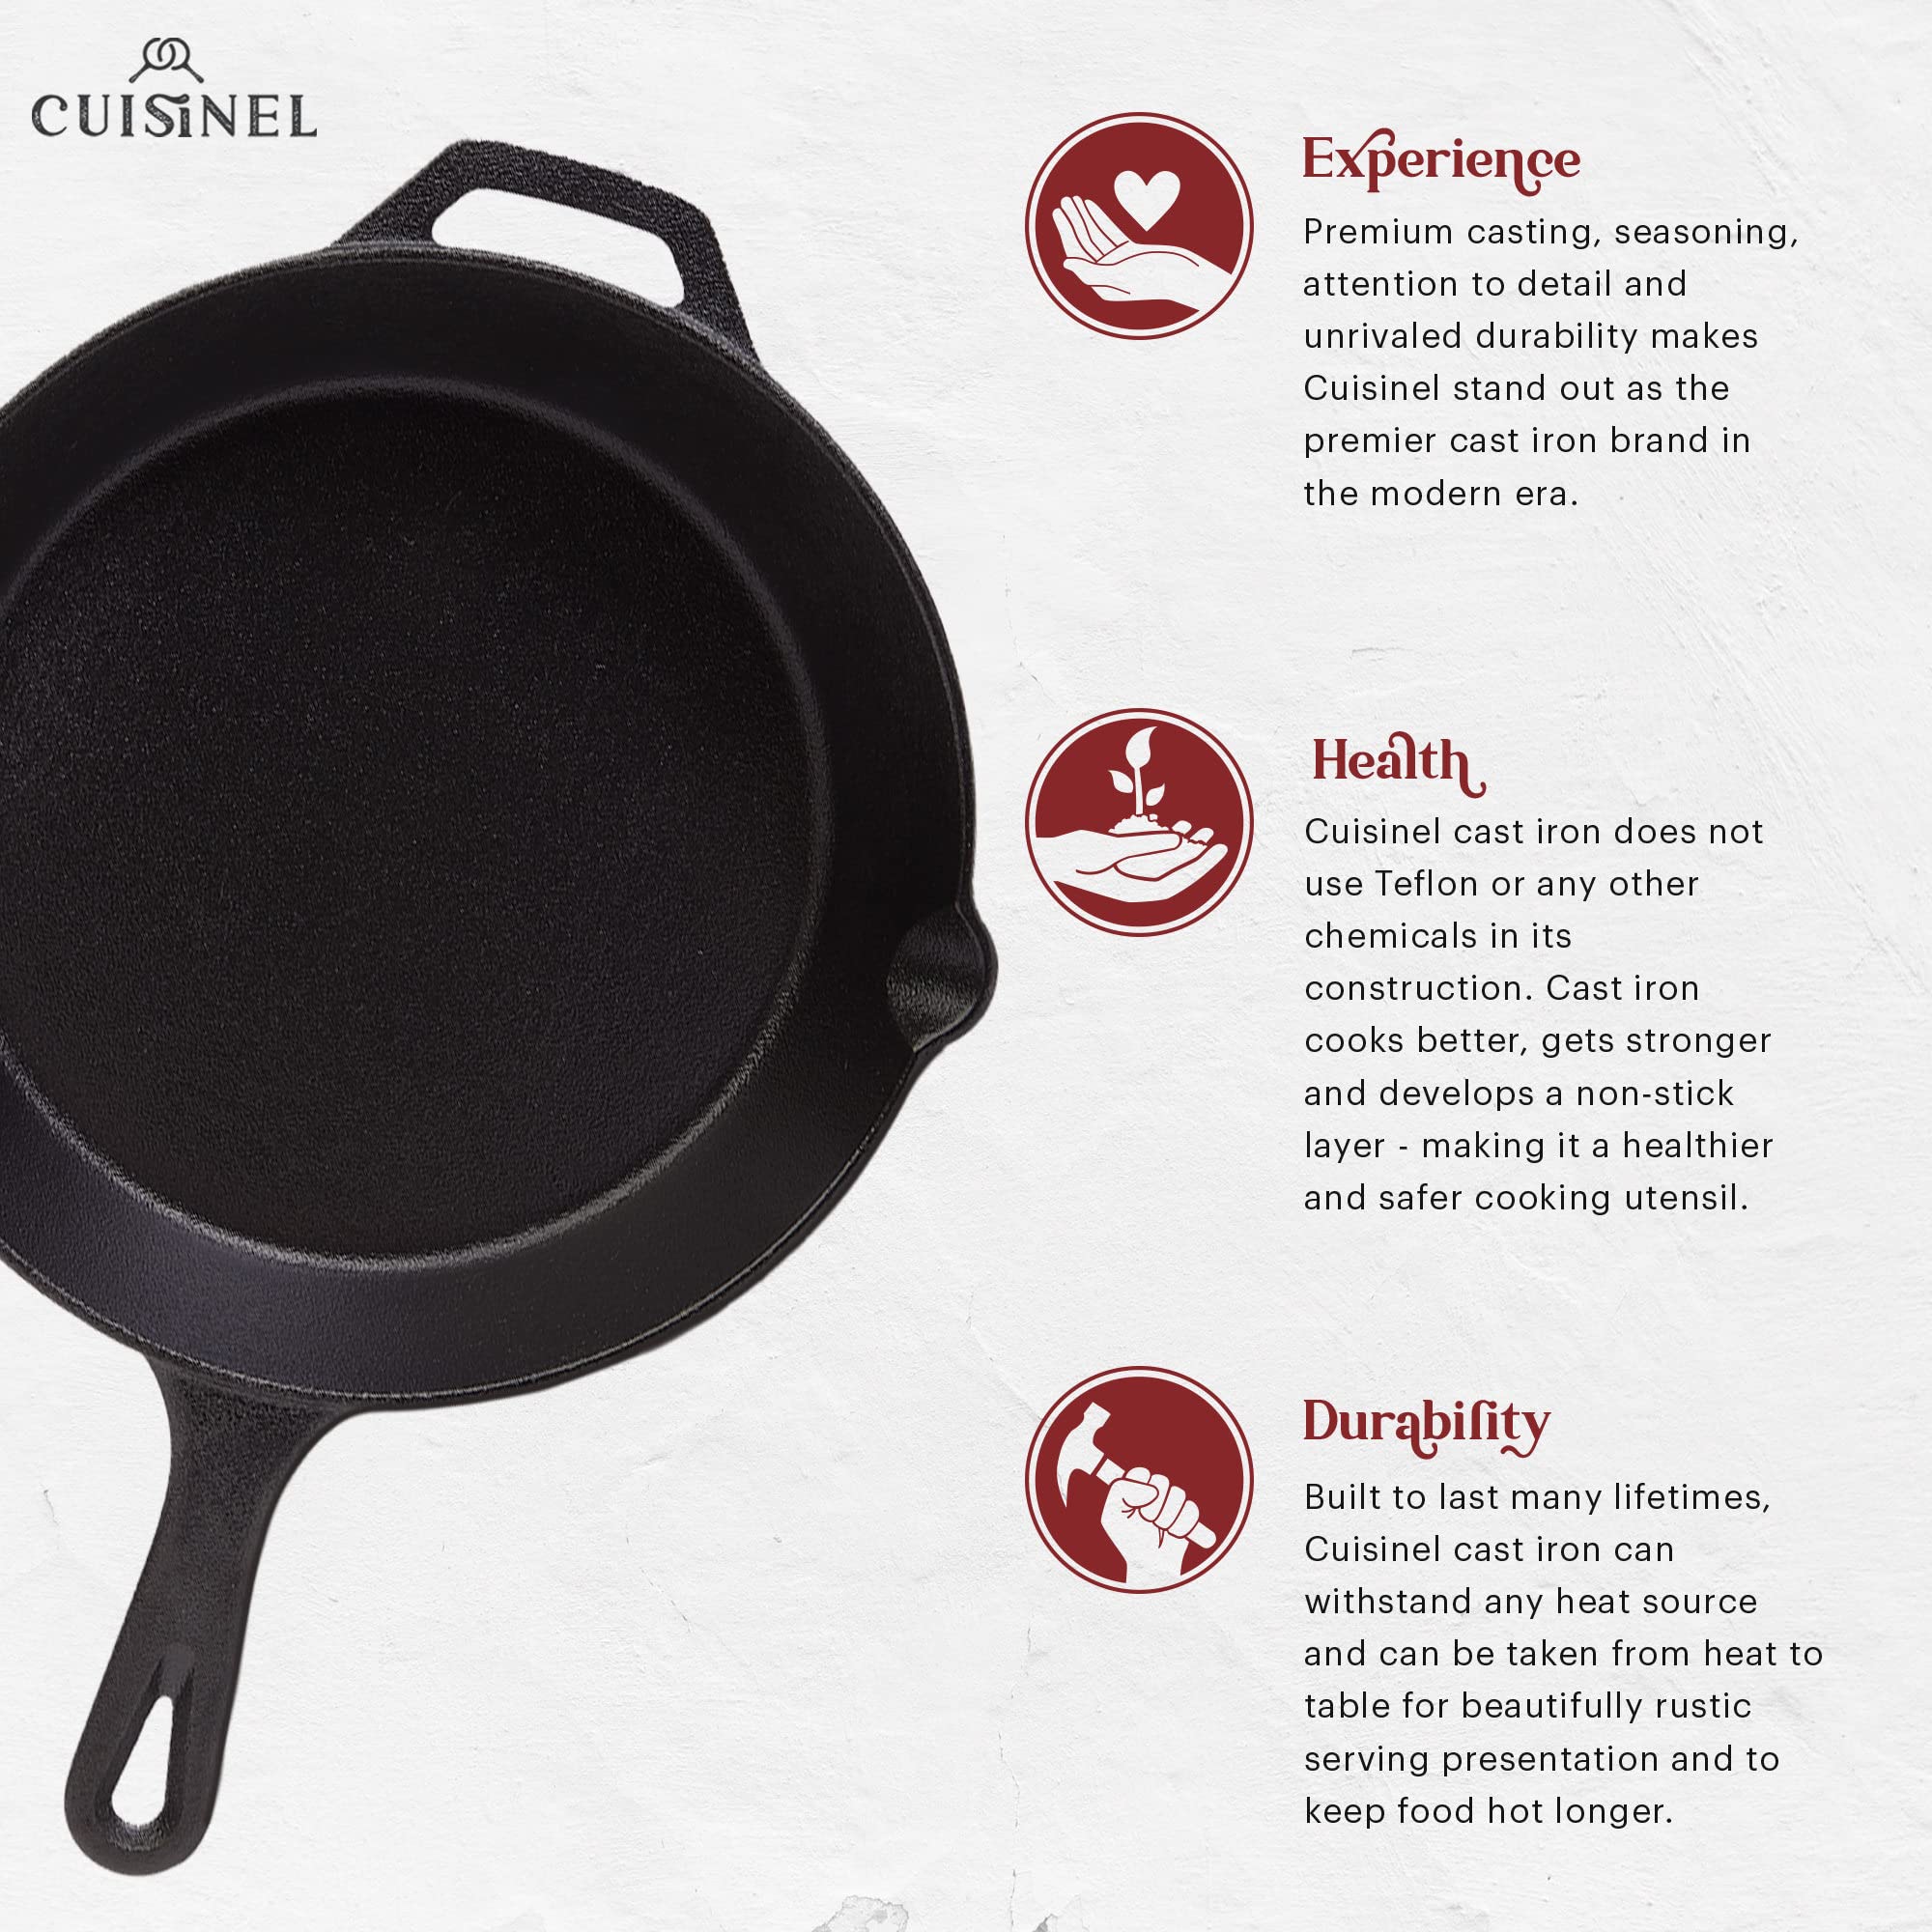 Cuisinel Cast Iron Grill Pan + Glass Lid - Square 10.5"-Inch Pre-Seasoned Skillet + Handle Cover + Pan Scraper - Grille, Firepit, Stovetop, Induction Safe - Great for Grilling, Frying, Sautéing  - Like New